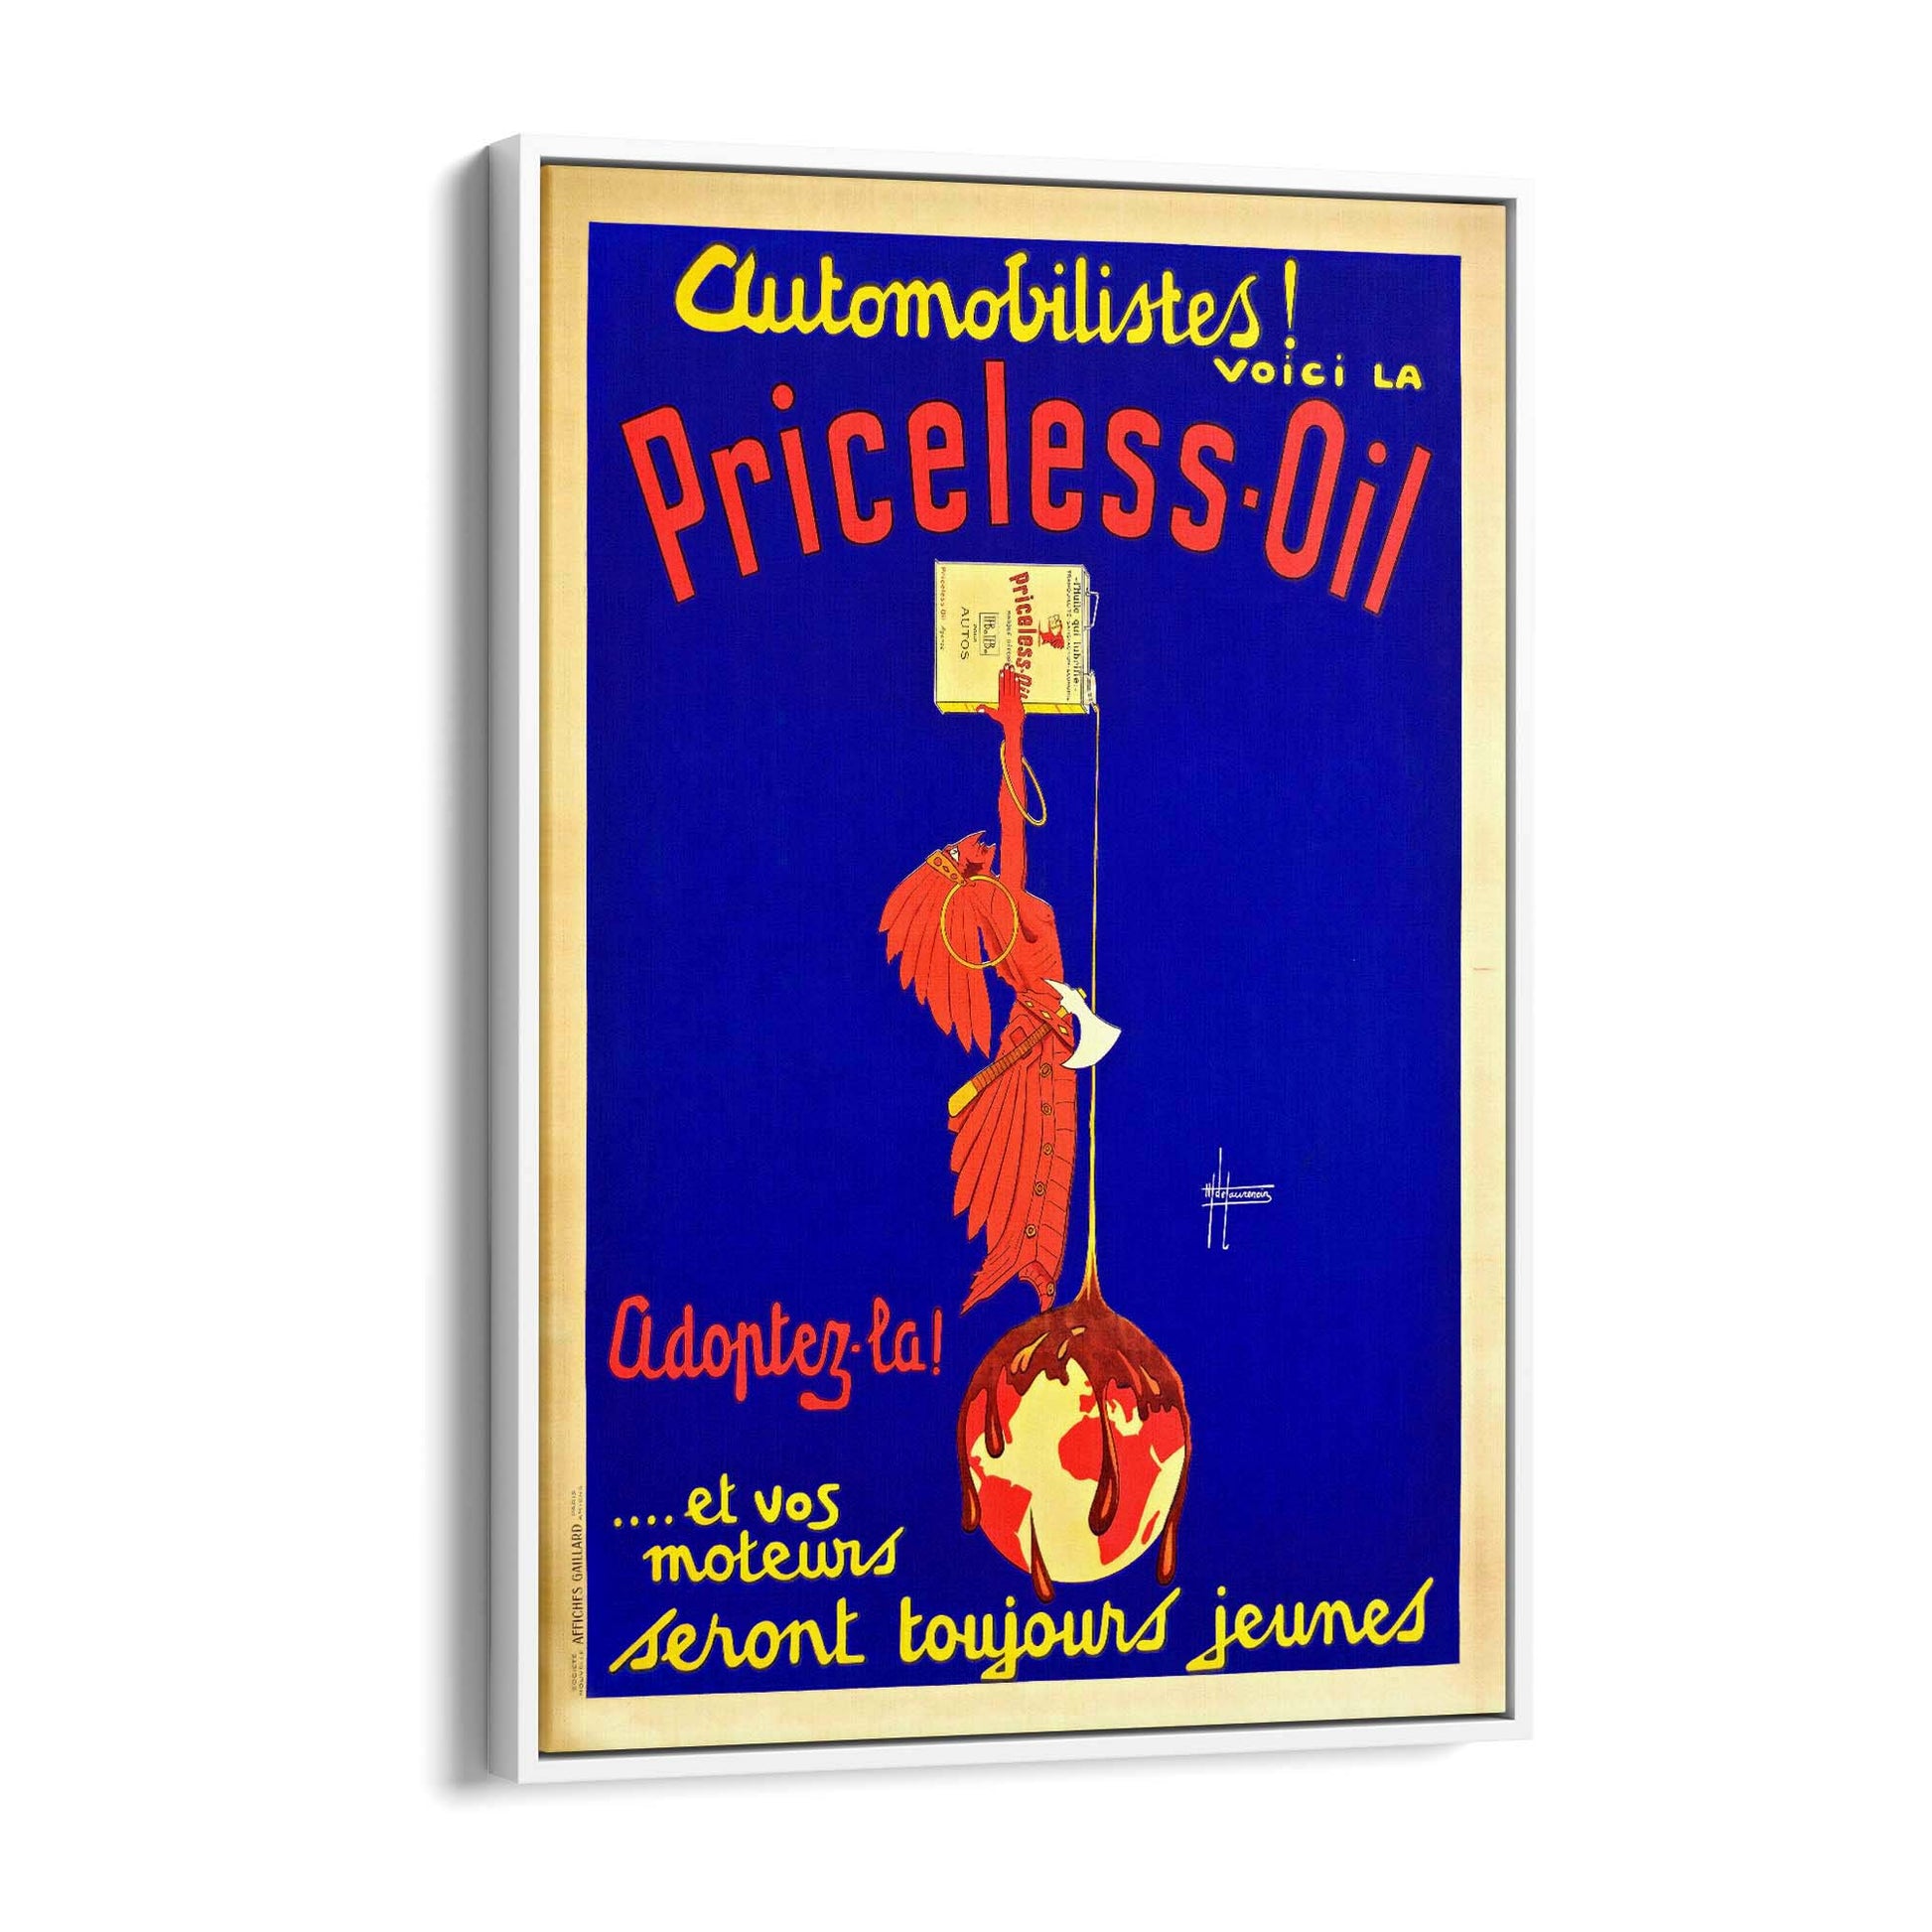 Priceless Oil Vintage Advert Man Garage Wall Art - The Affordable Art Company